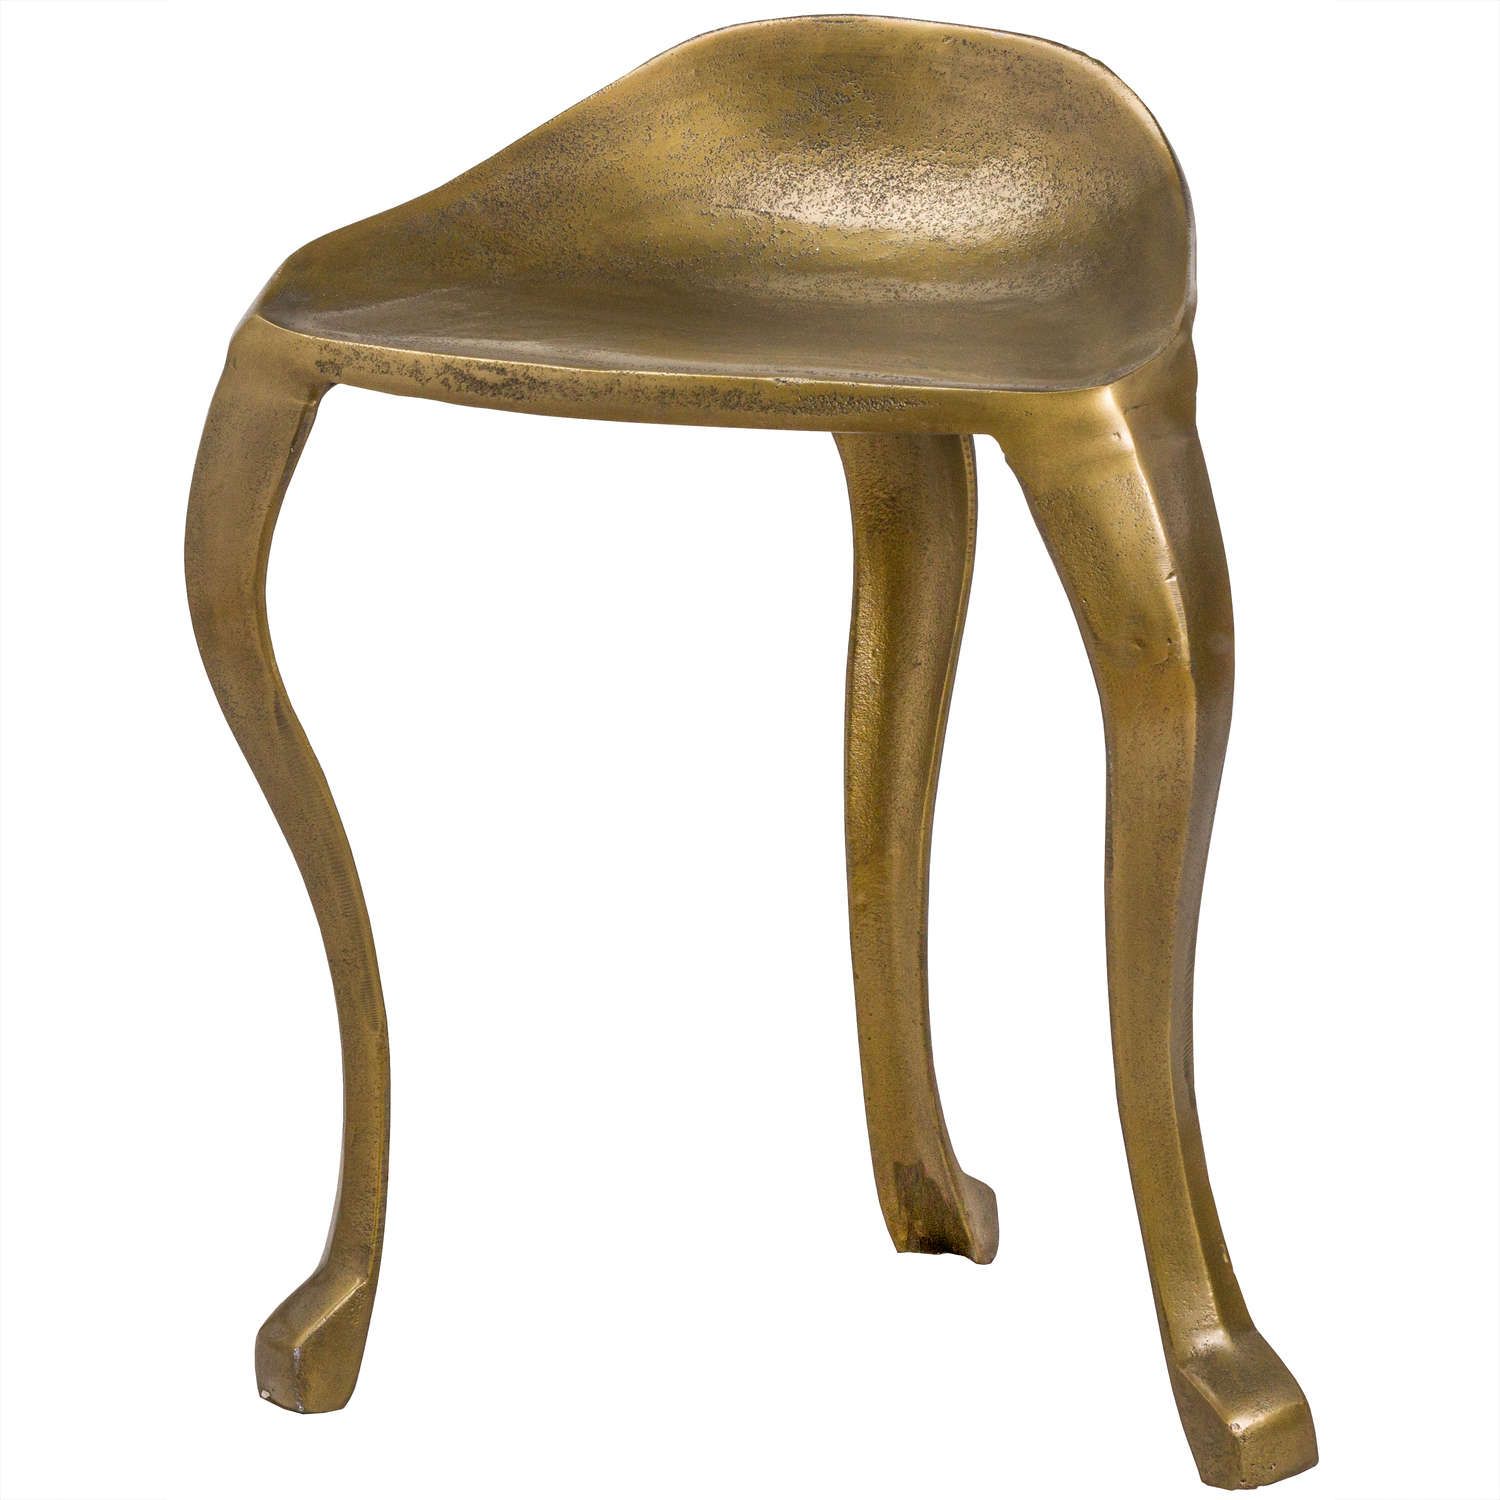 Antique Brass Cast Ohlson Stool | From Baytree Interiors With White Antique Brass Stools (View 6 of 20)